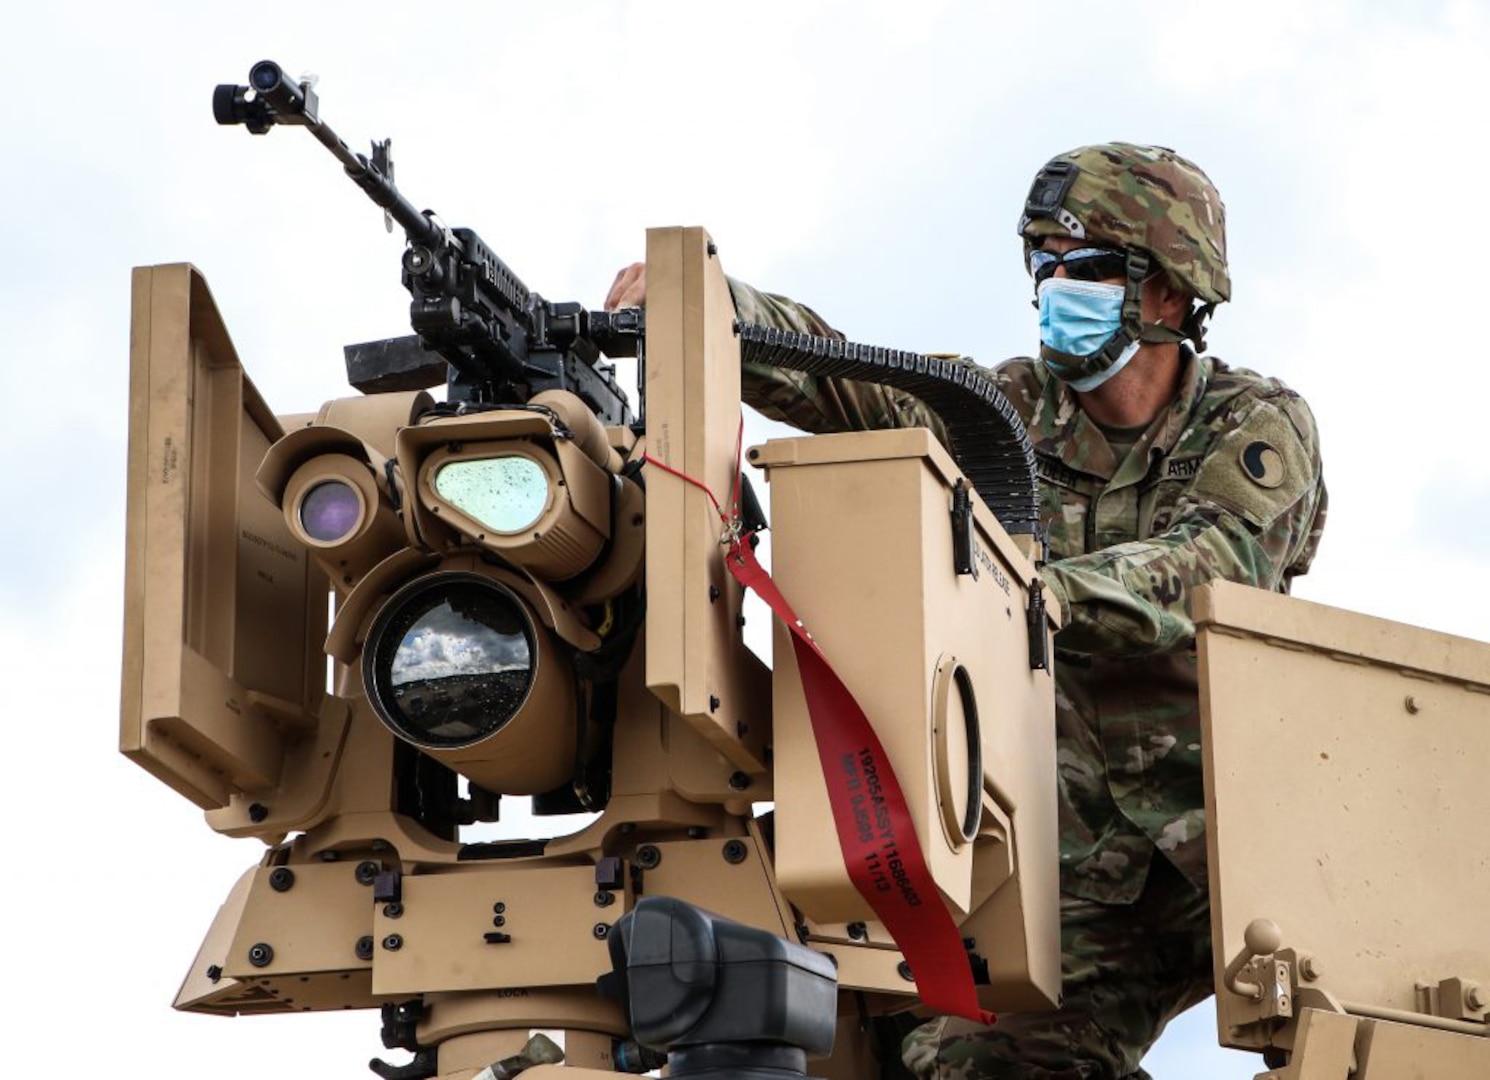 Virginia Army National Guard Soldiers from across the state conduct training on the Common Remotely Operated Weapon Station during a one-week training course Aug. 17-21, 2020, at Fort Pickett, Virginia.